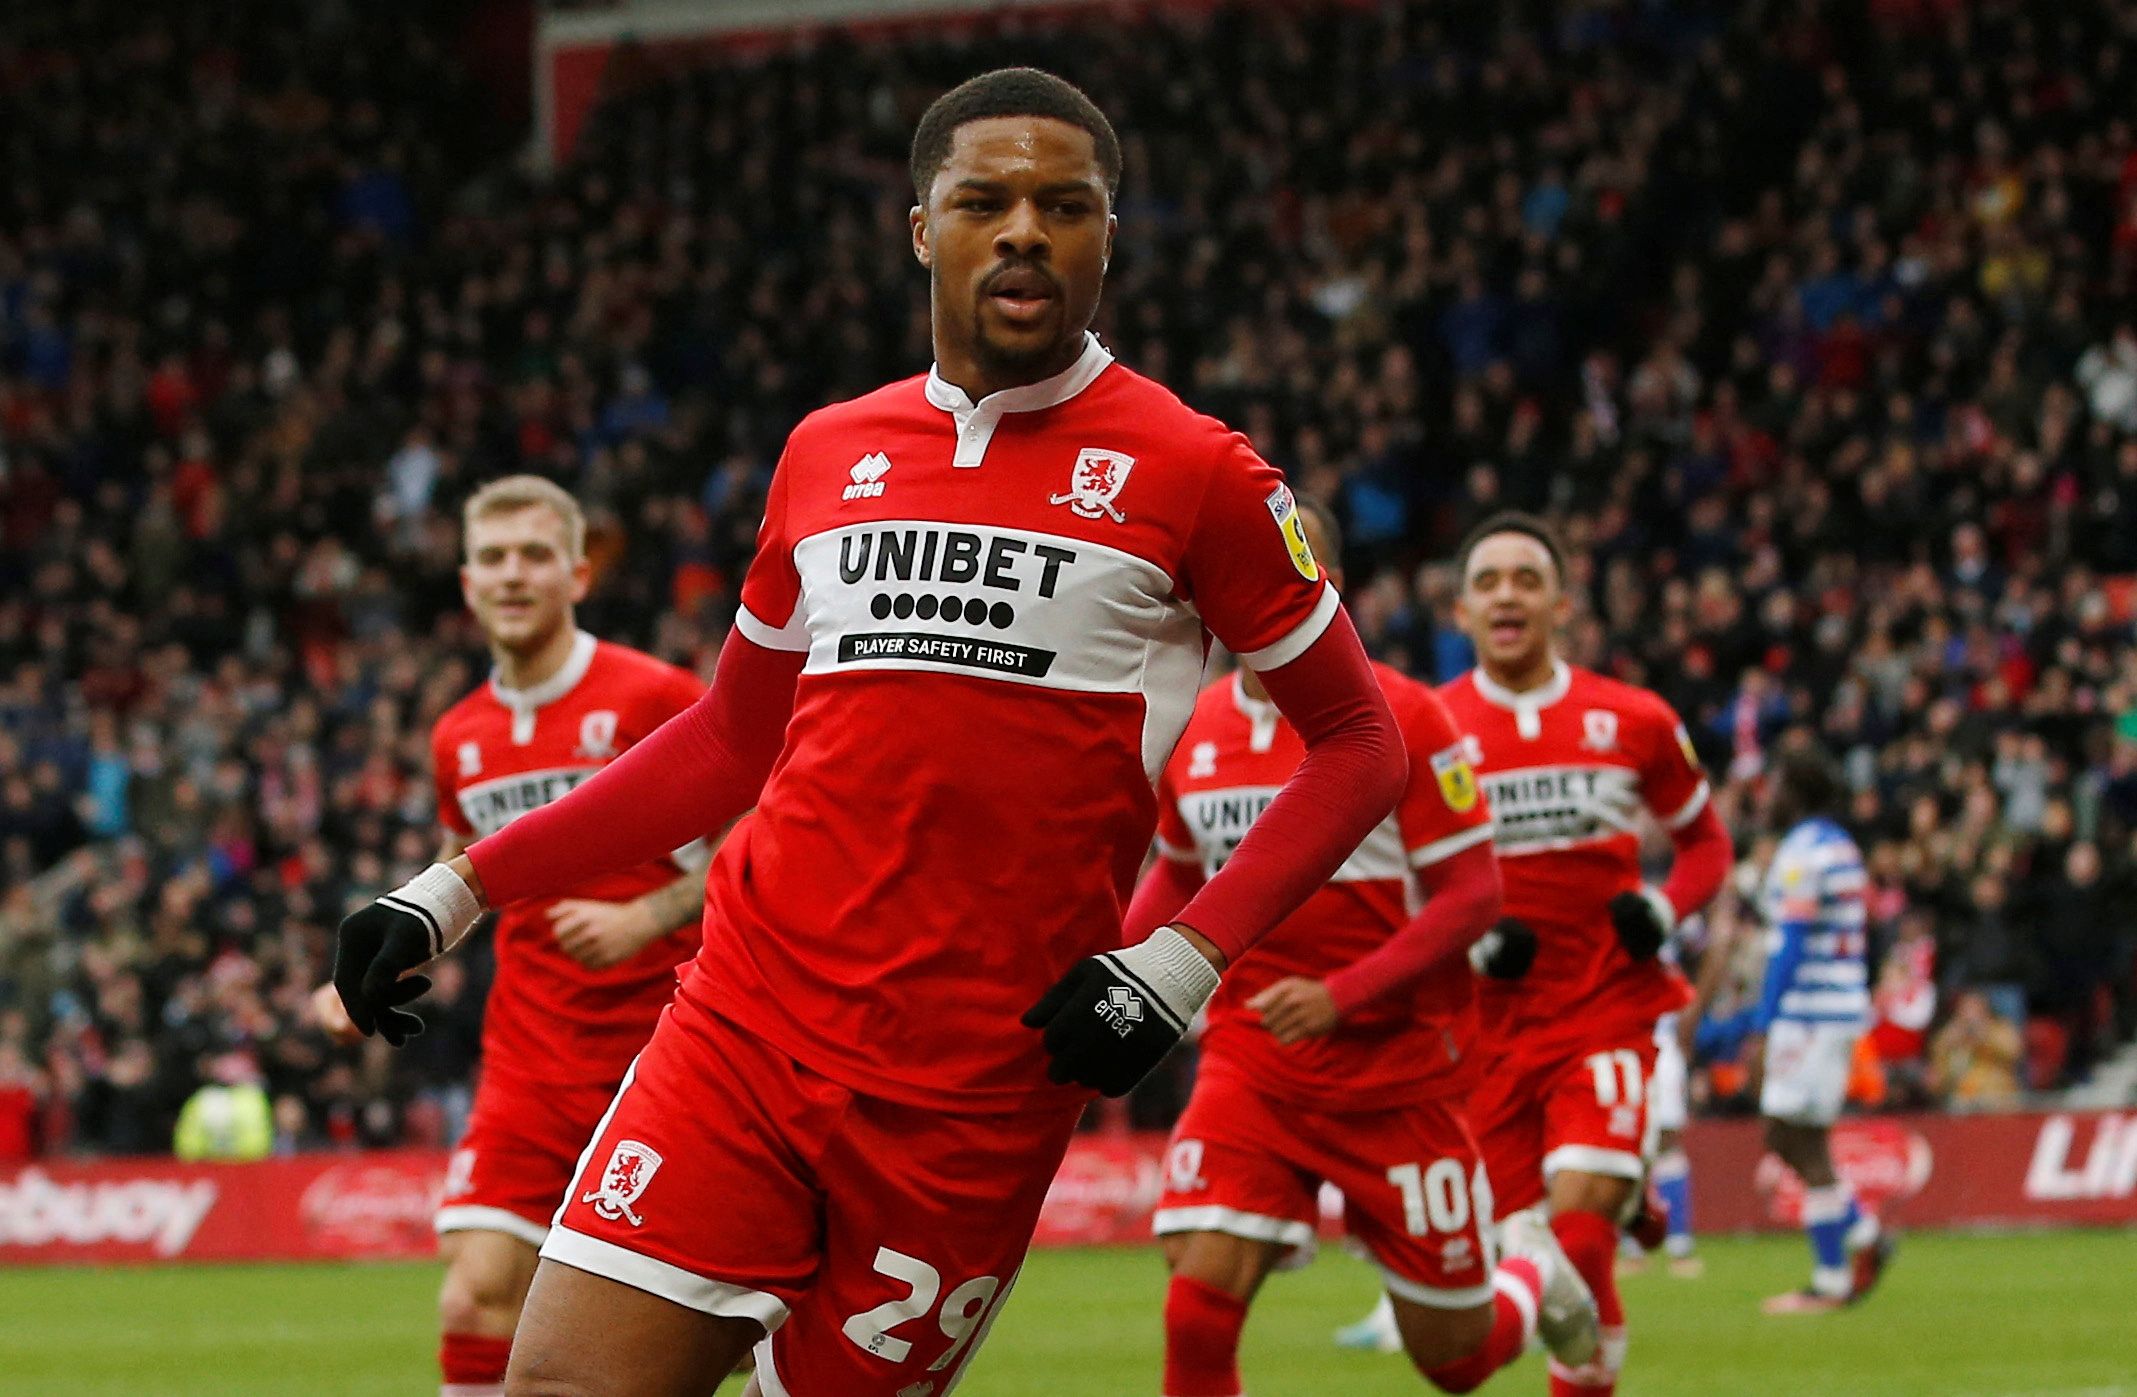 Soccer Football - Championship - Middlesbrough v Reading - Riverside Stadium, Middlesbrough, Britain - March 4, 2023  Middlesbrough's Chuba Akpom celebrates scoring their first goal   Action Images/Craig Brough  EDITORIAL USE ONLY. No use with unauthorized audio, video, data, fixture lists, club/league logos or 